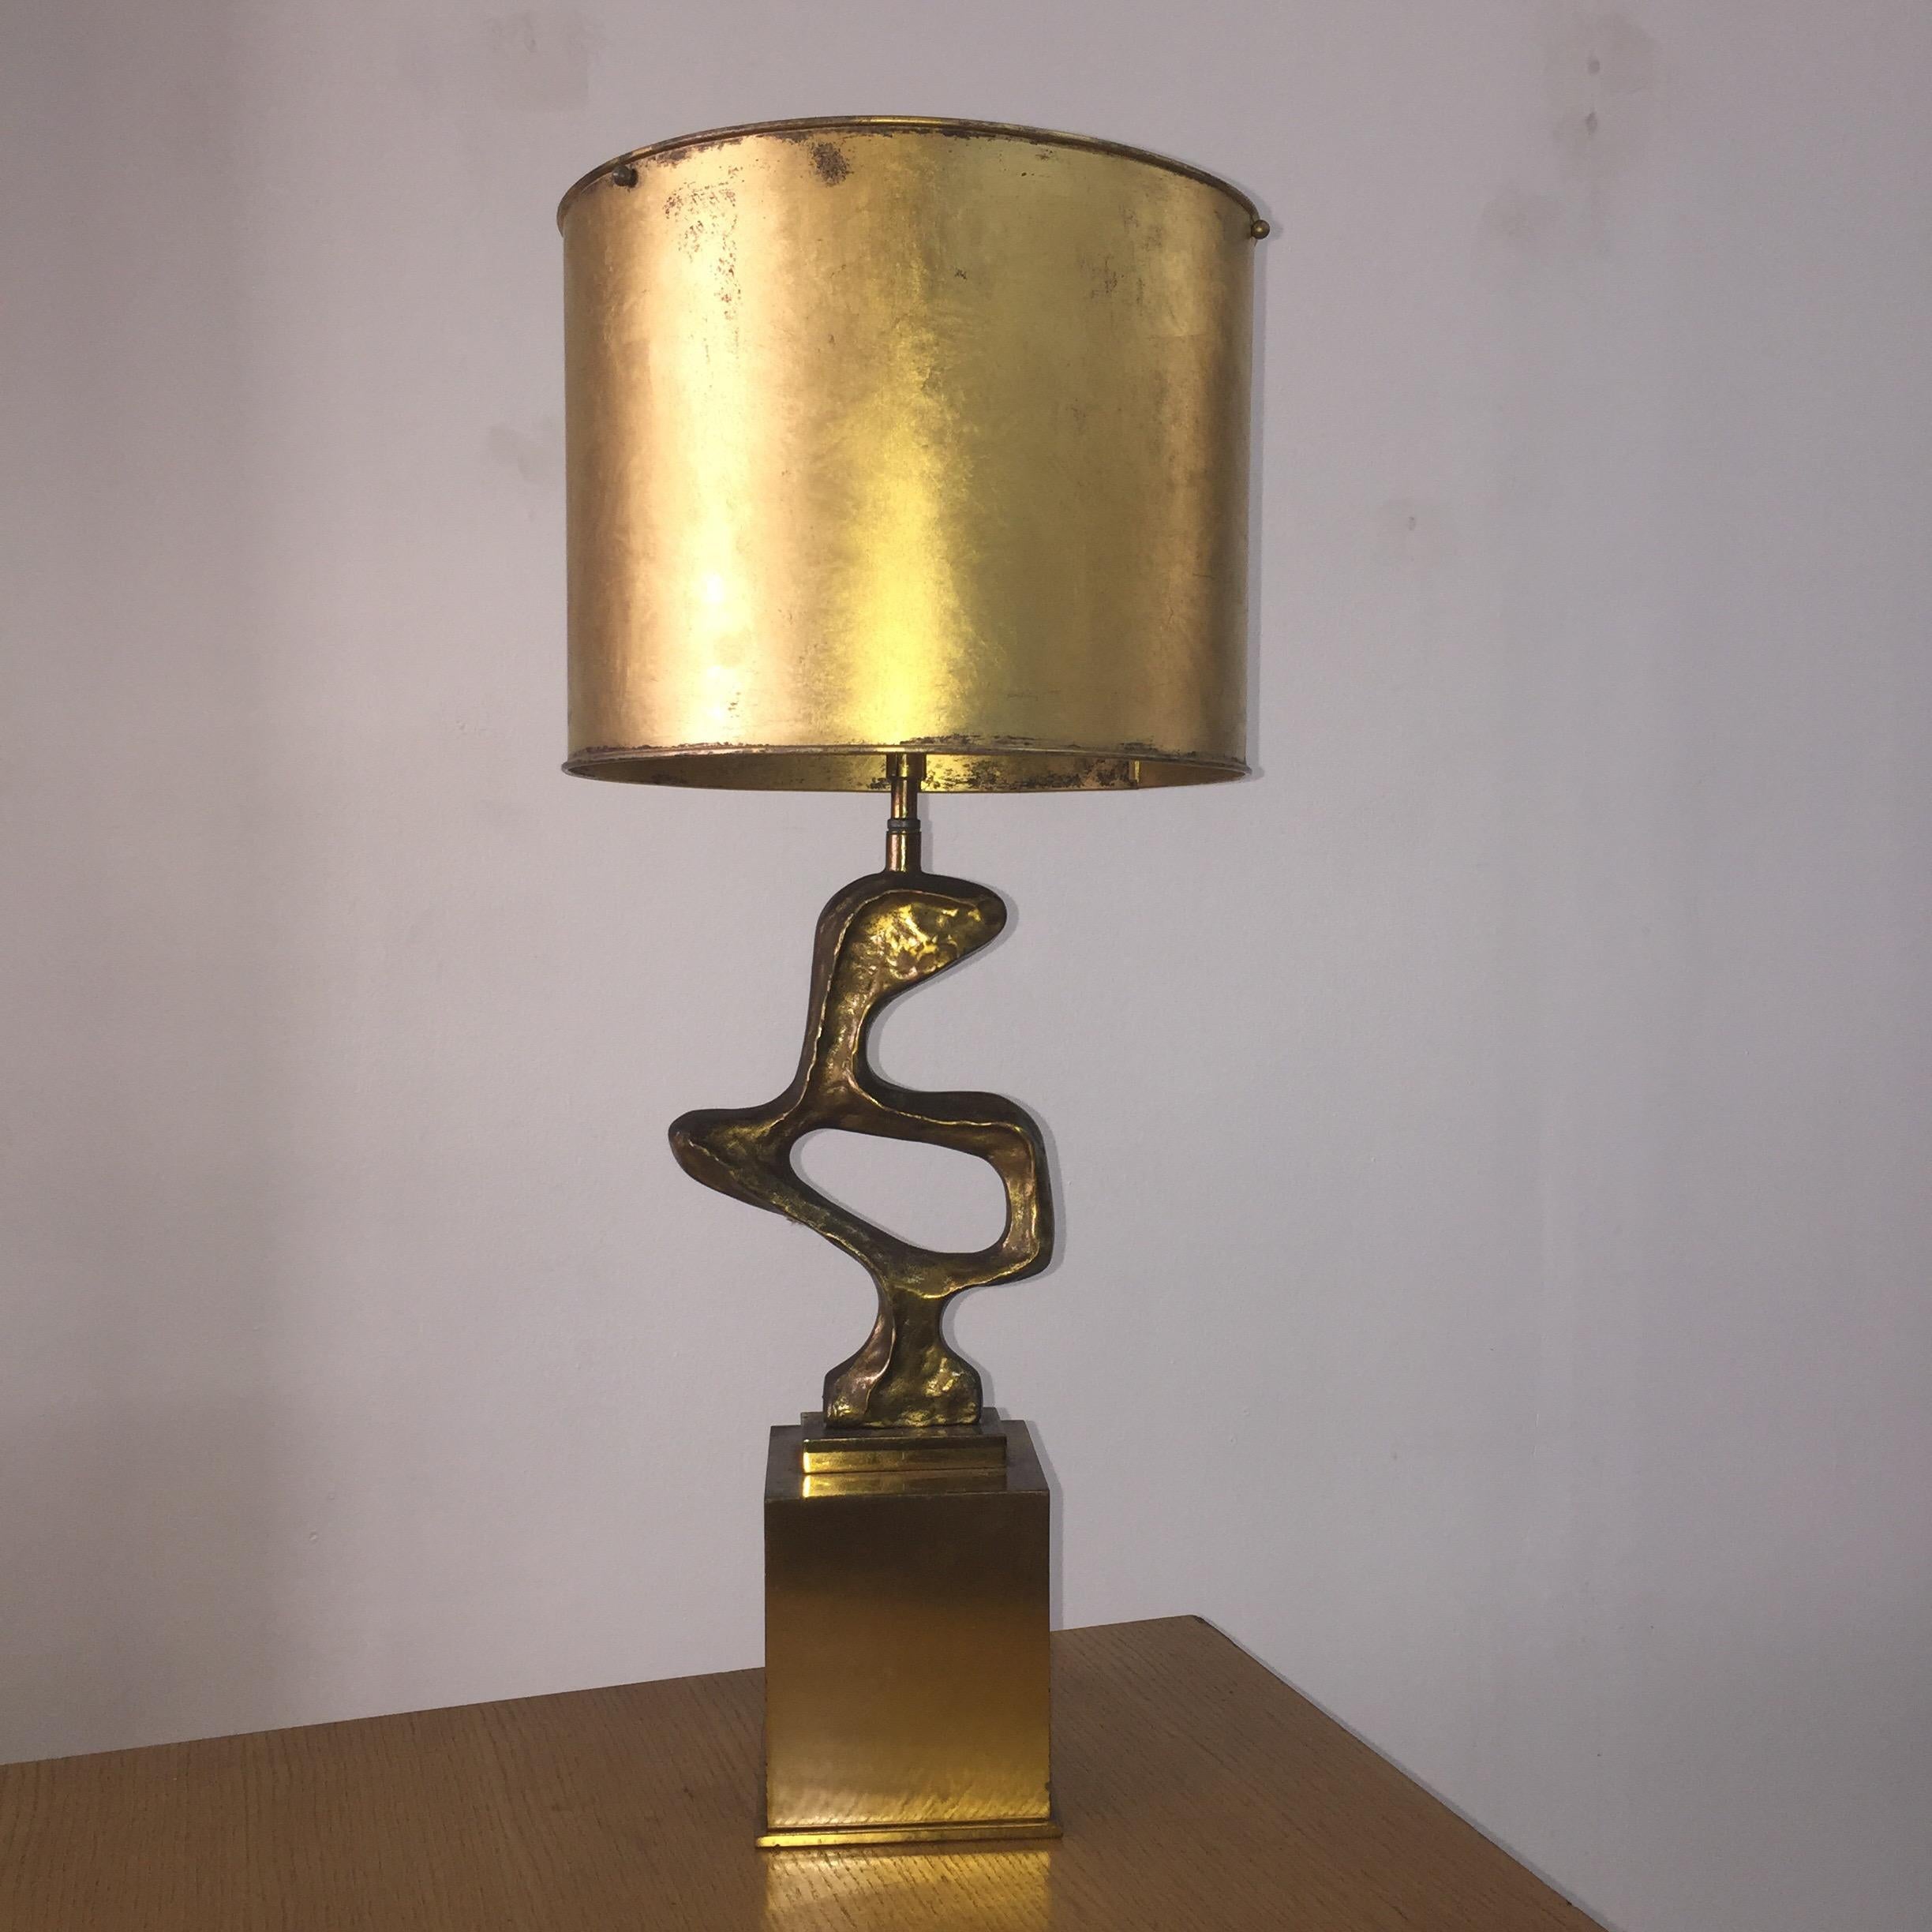 French Philippe Gabriel Papineau Sculptural Gilt Bronze Lamp Signed, Title 